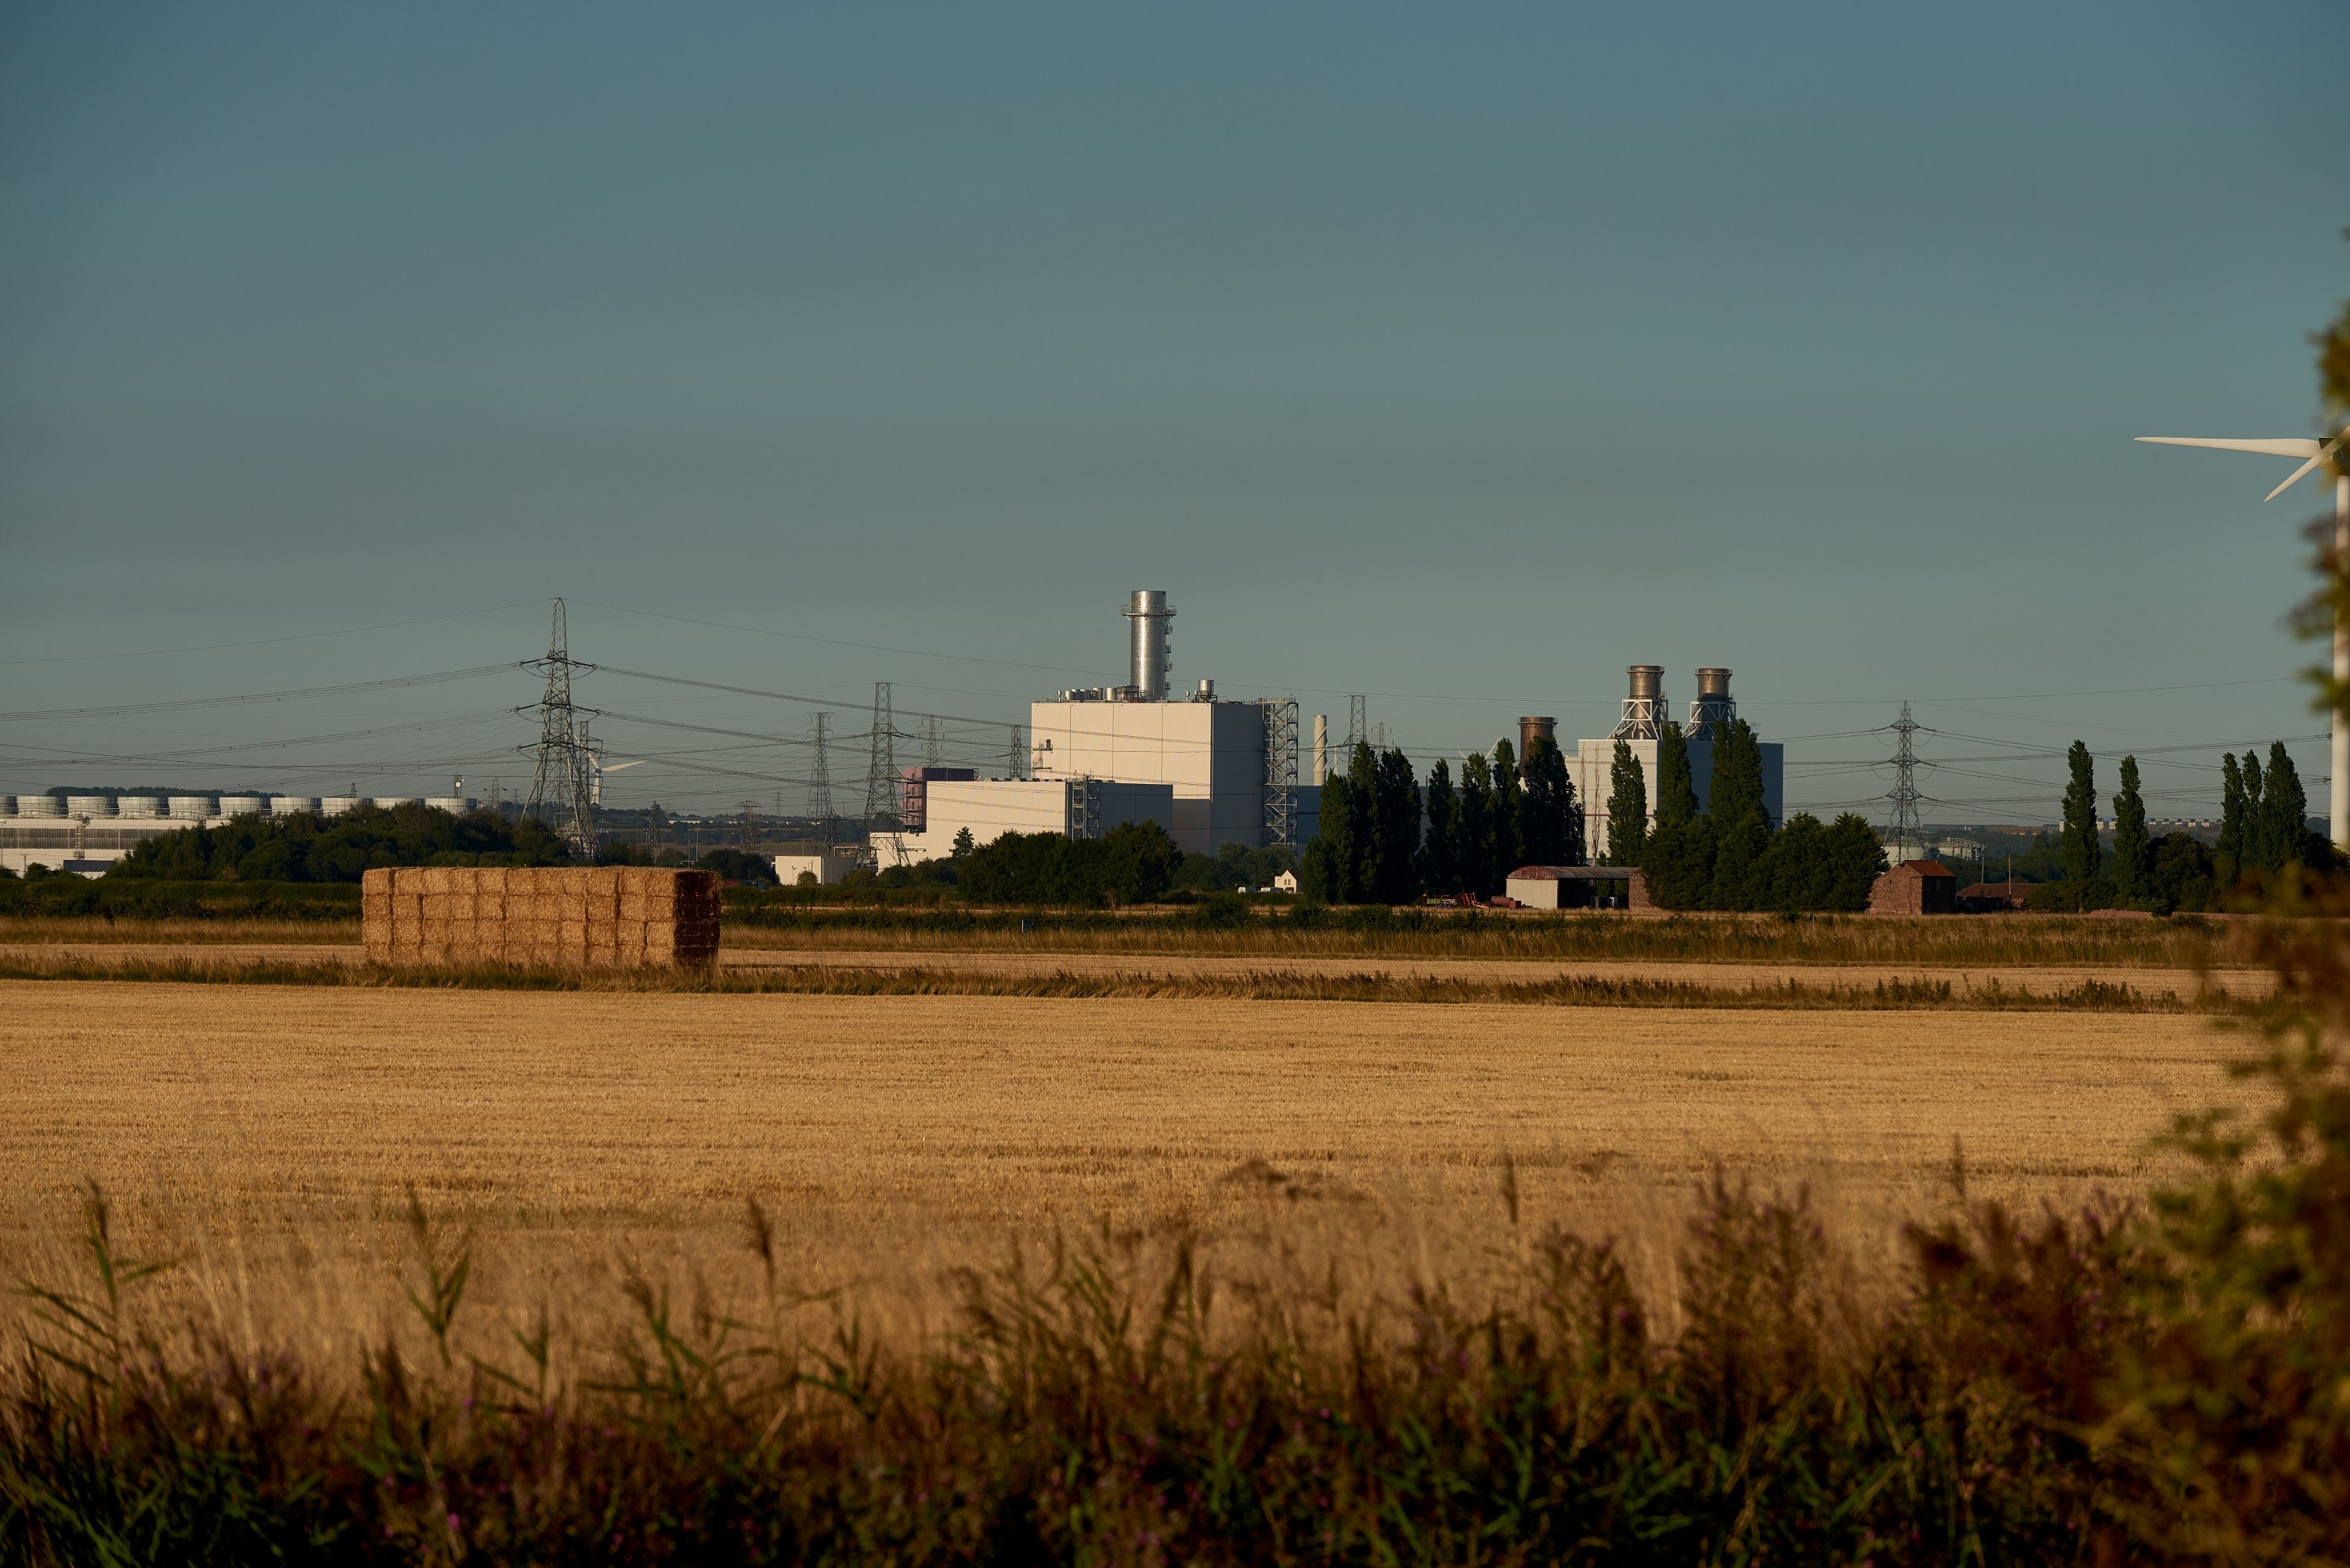 A large power station in the distance with fields and electricity pylons/towers and wires surrounding it